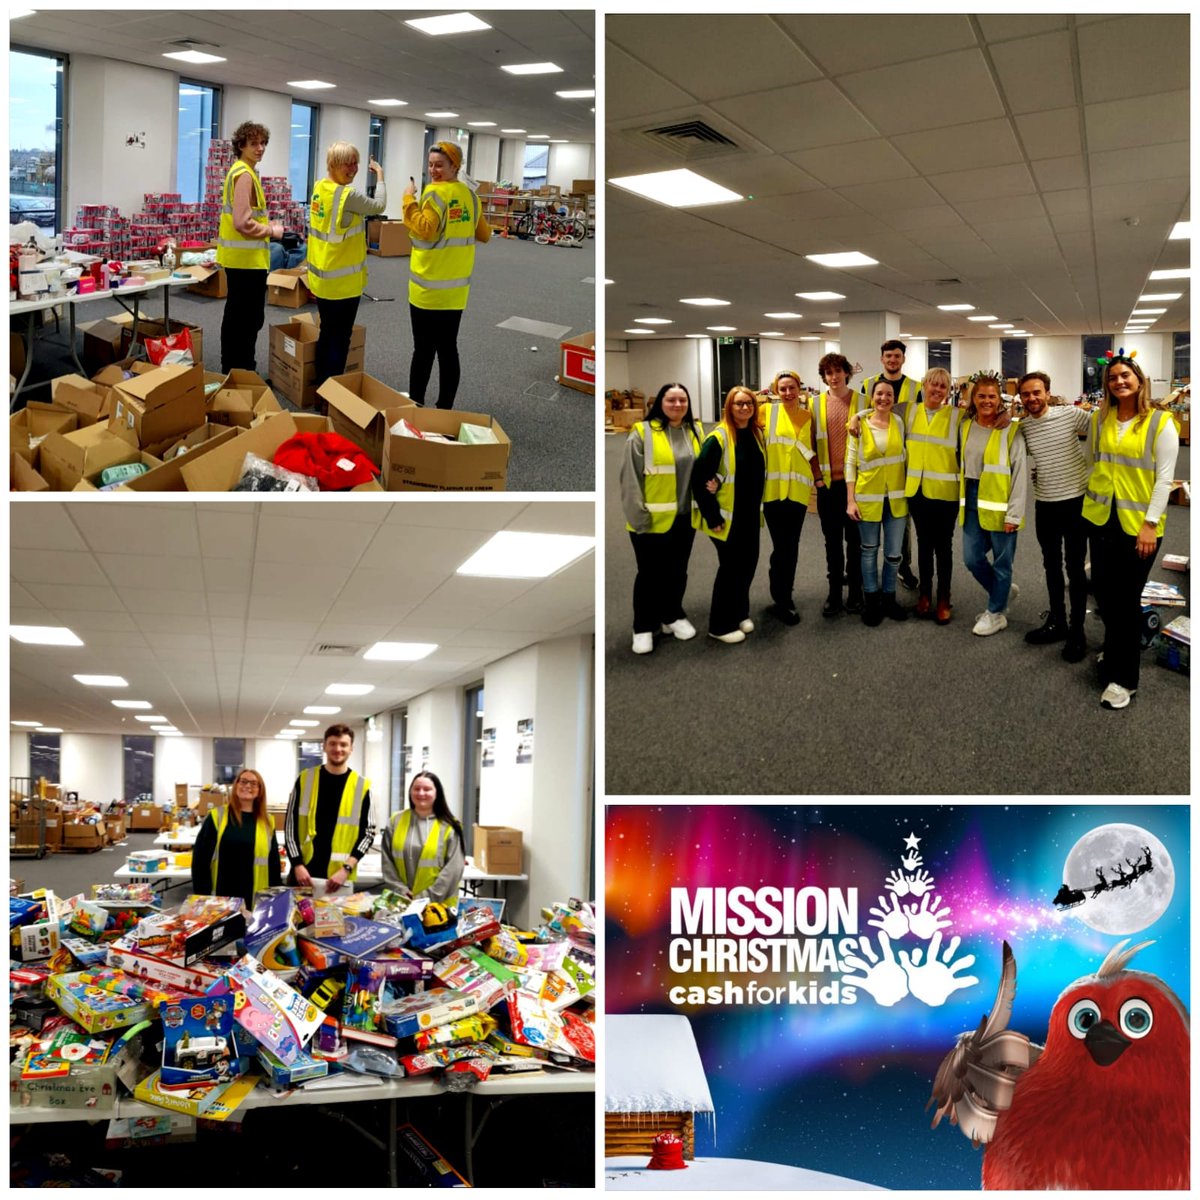 A fantastic weekend with some of the team volunteering @CashforkidsMCR Mission HQ to help package up toys as part of their wonderful #MissionChristmas  campaign. Thank you to everyone who donated for this fantastic cause. https://t.co/UvvXYzS0V5